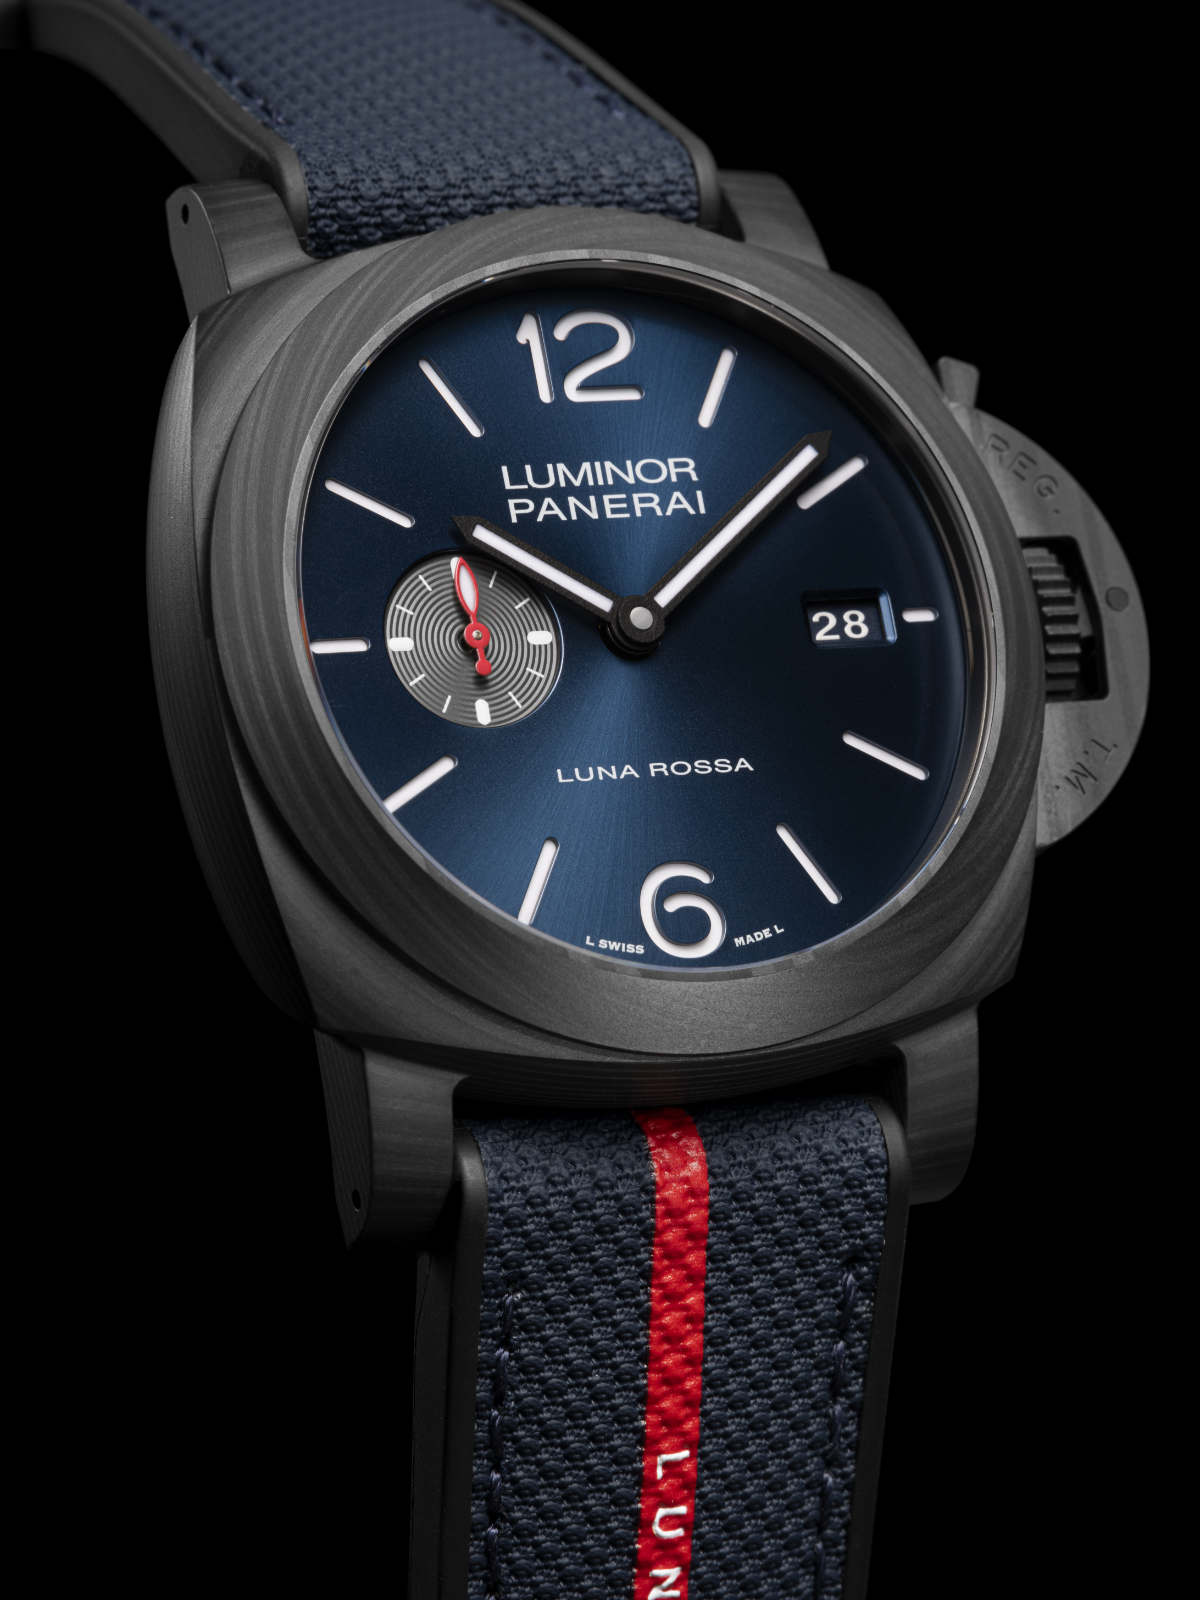 Luminor Luna Rossa Carbotech™ - A 24-hour Exclusive In A 37-piece Limited Edition